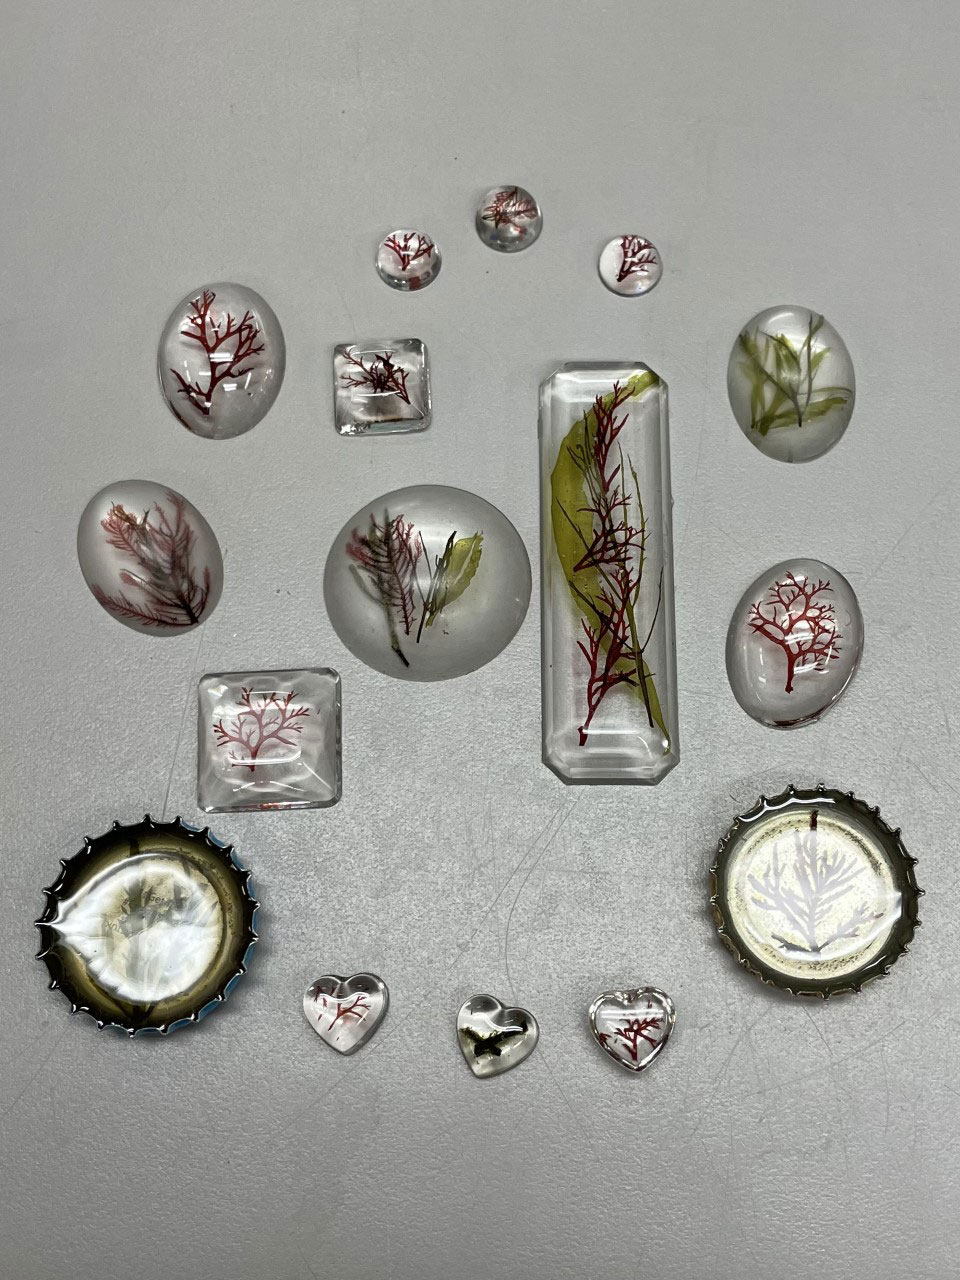 Red, green and brown bits of algae set in clear resin molded into various shapes like hearts, ovals and rectangles; metal bottle caps filled with resin and algae.